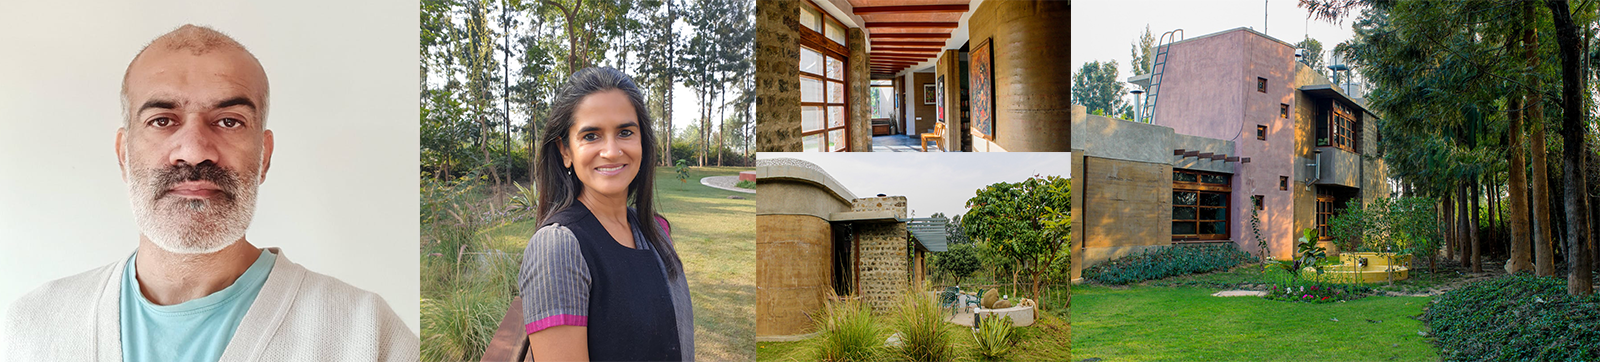 Tricity’s maiden rammed earth house, an enigma for urban folks